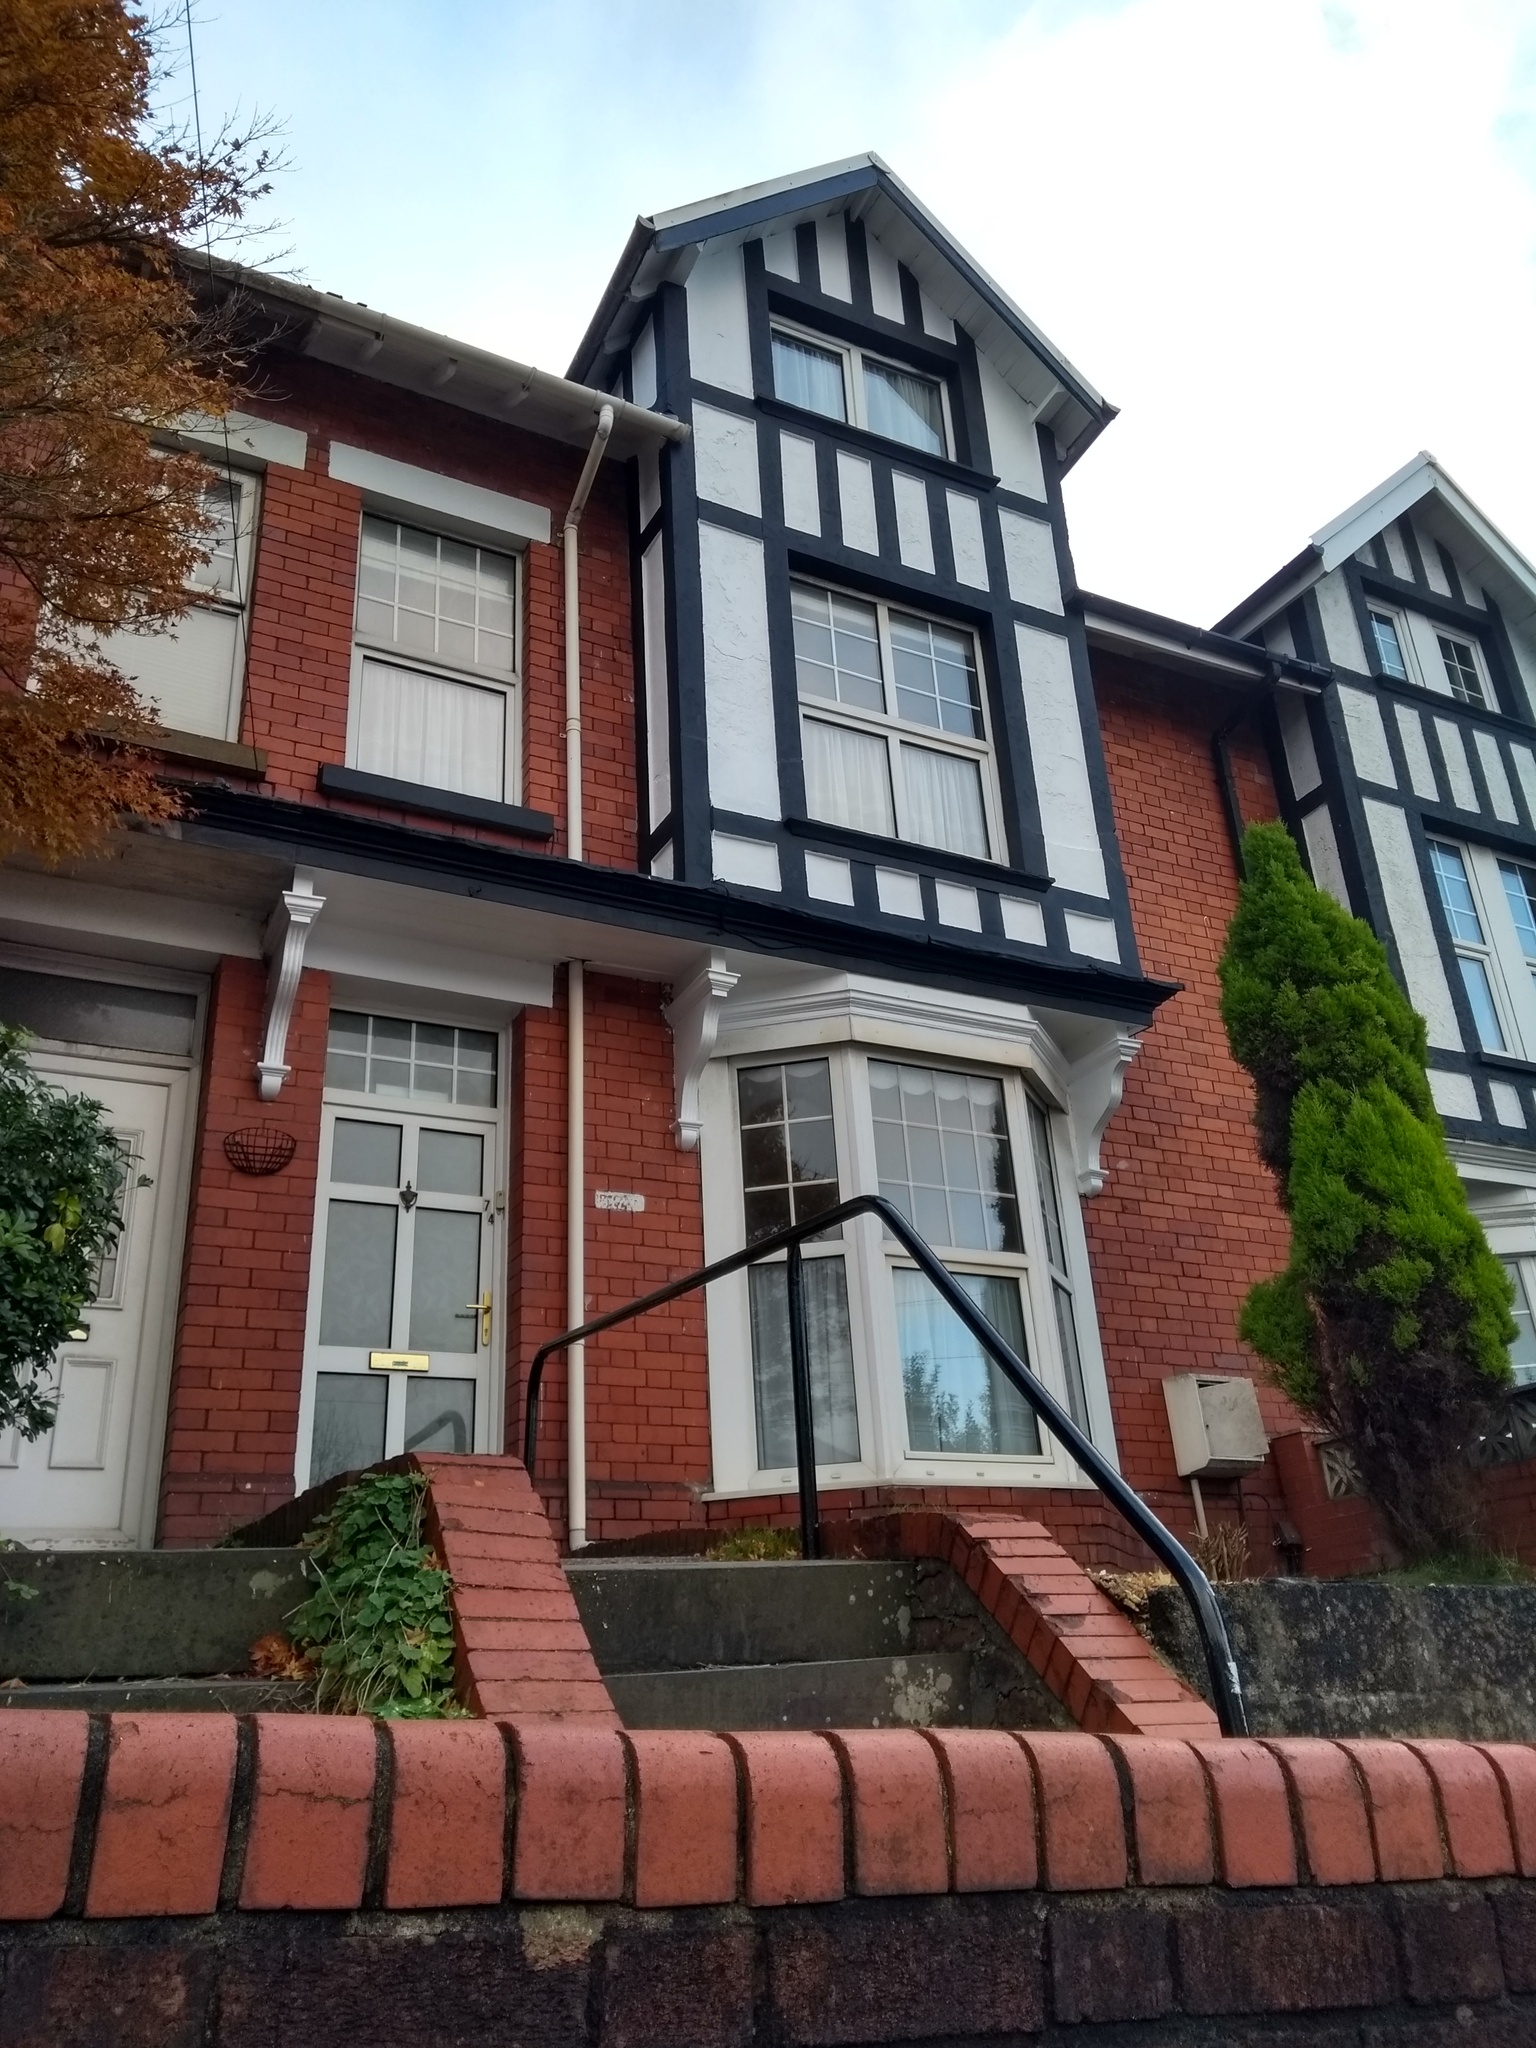 5 bed Terraced for rent in Dunvant. From Mirador Property Lettings - Swansea